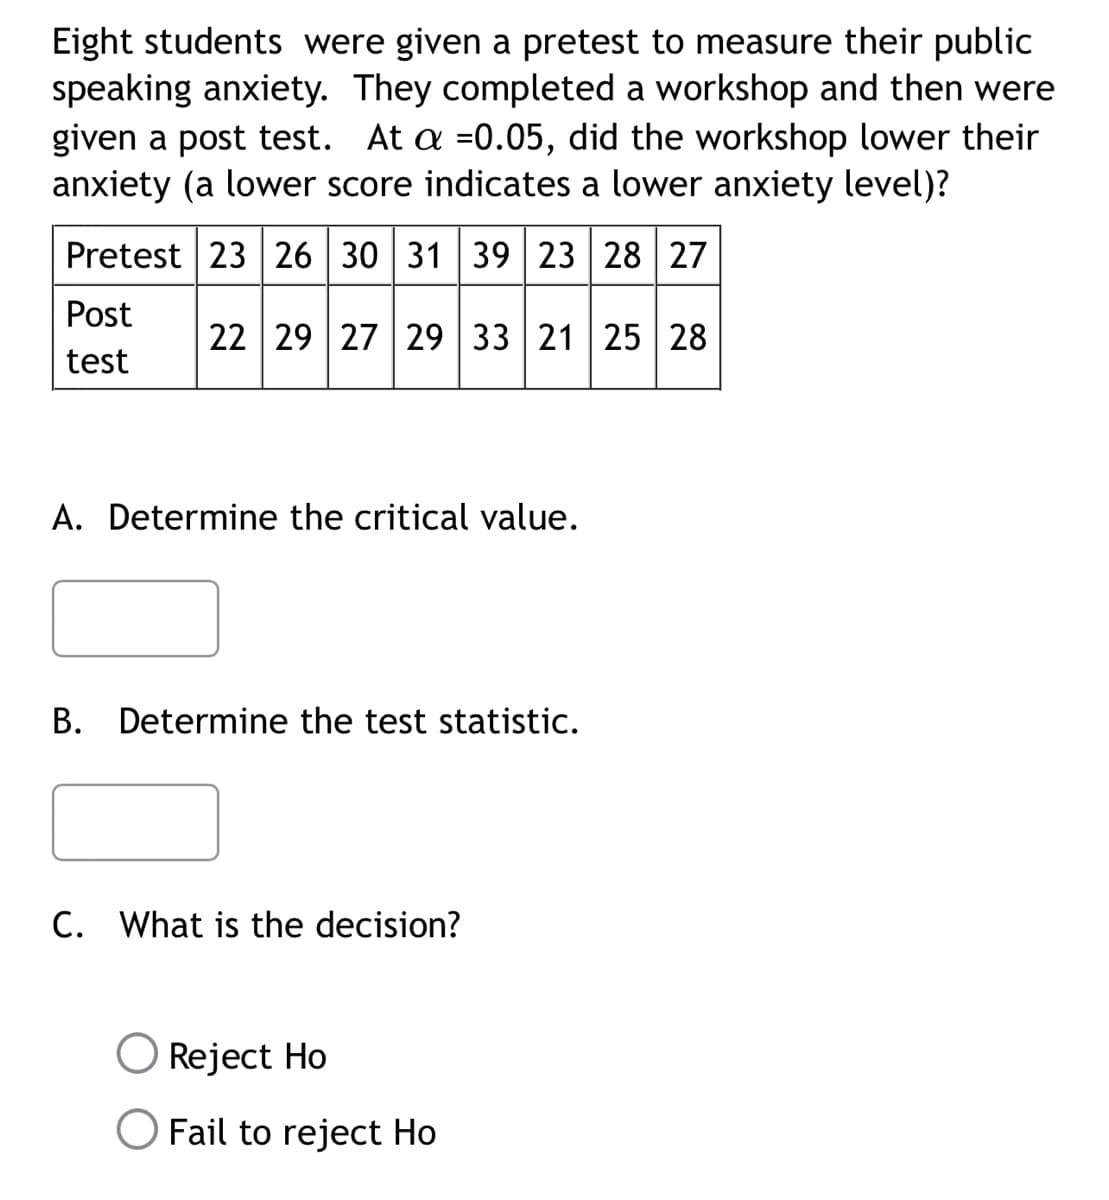 Eight students were given a pretest to measure their public
speaking anxiety. They completed a workshop and then were
given a post test. At a =0.05, did the workshop lower their
anxiety (a lower score indicates a lower anxiety level)?
Pretest 23 26 30 31 39 23 28 27
Post
test
22 29 27 29 33 21 25 28
A. Determine the critical value.
B. Determine the test statistic.
C. What is the decision?
Reject Ho
Fail to reject Ho